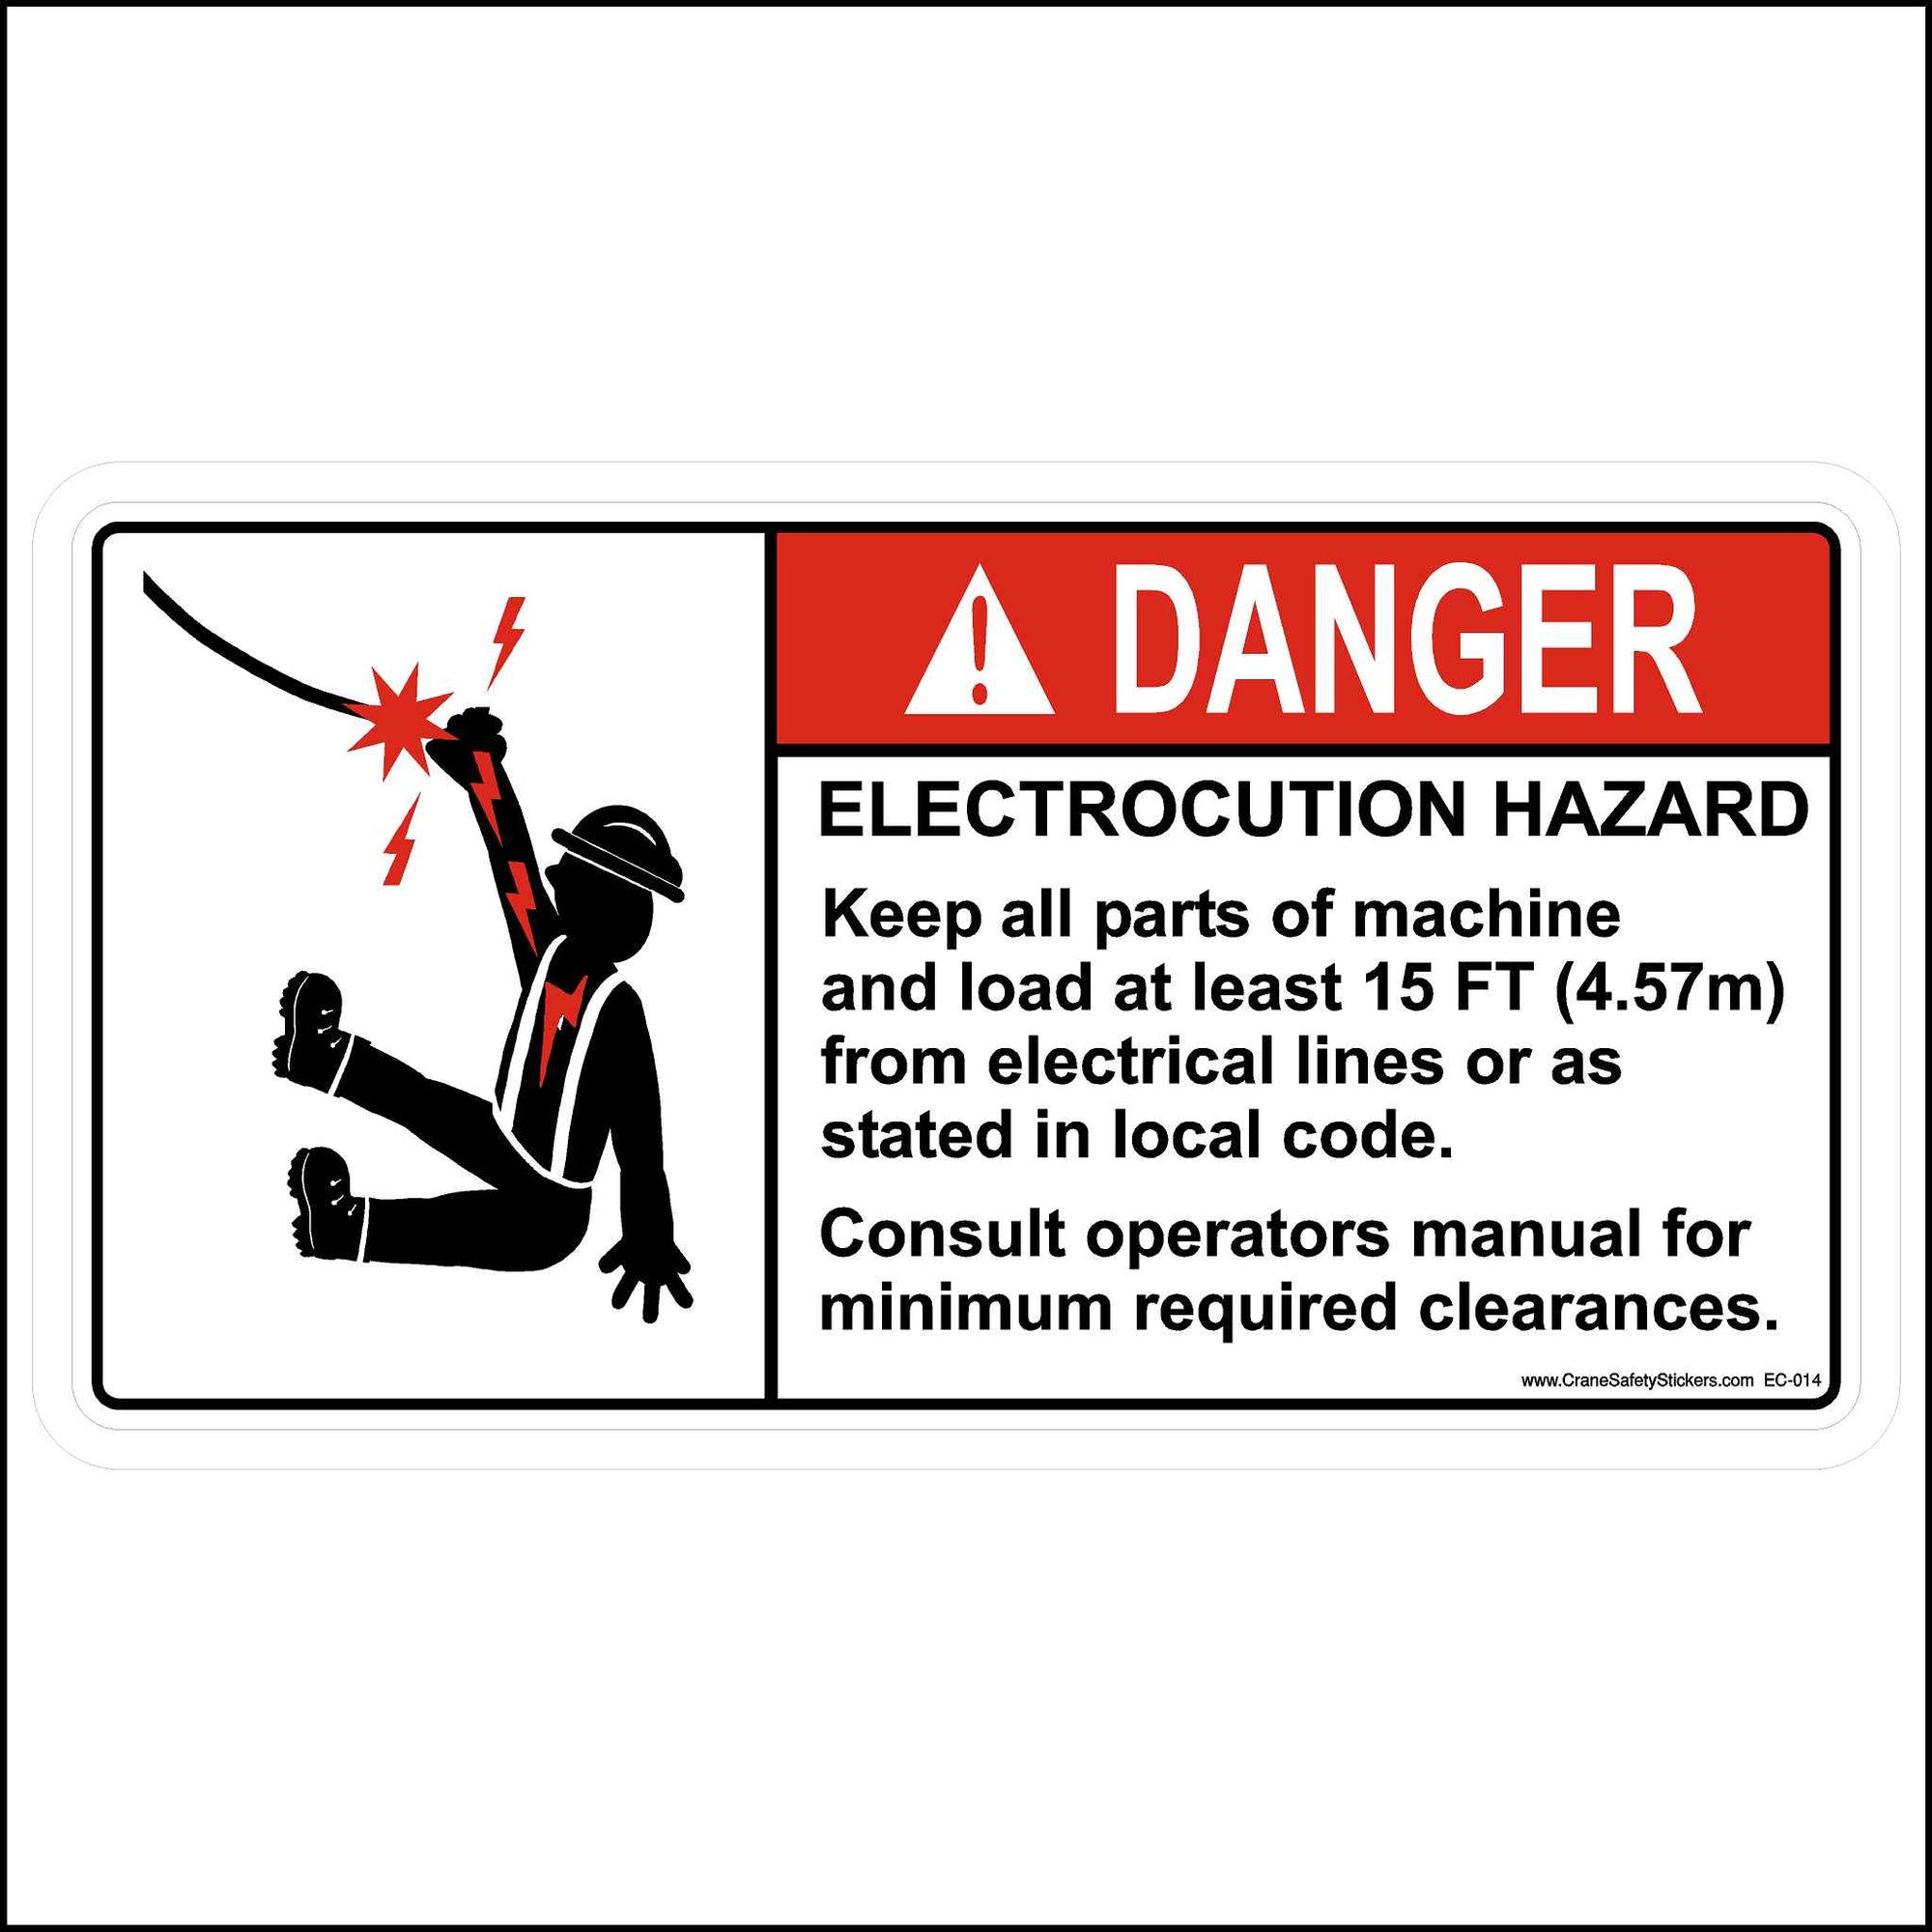 Electrocution Hazard Sticker Stay 15 Feet Away From Electrical Lines. This sticker is printed with the words, DANGER, Keep all parts of the machine and load at least 15 FT (4.57m) from electrical lines or as stated in the local code. Consult the operator's manual for the minimum required clearances.